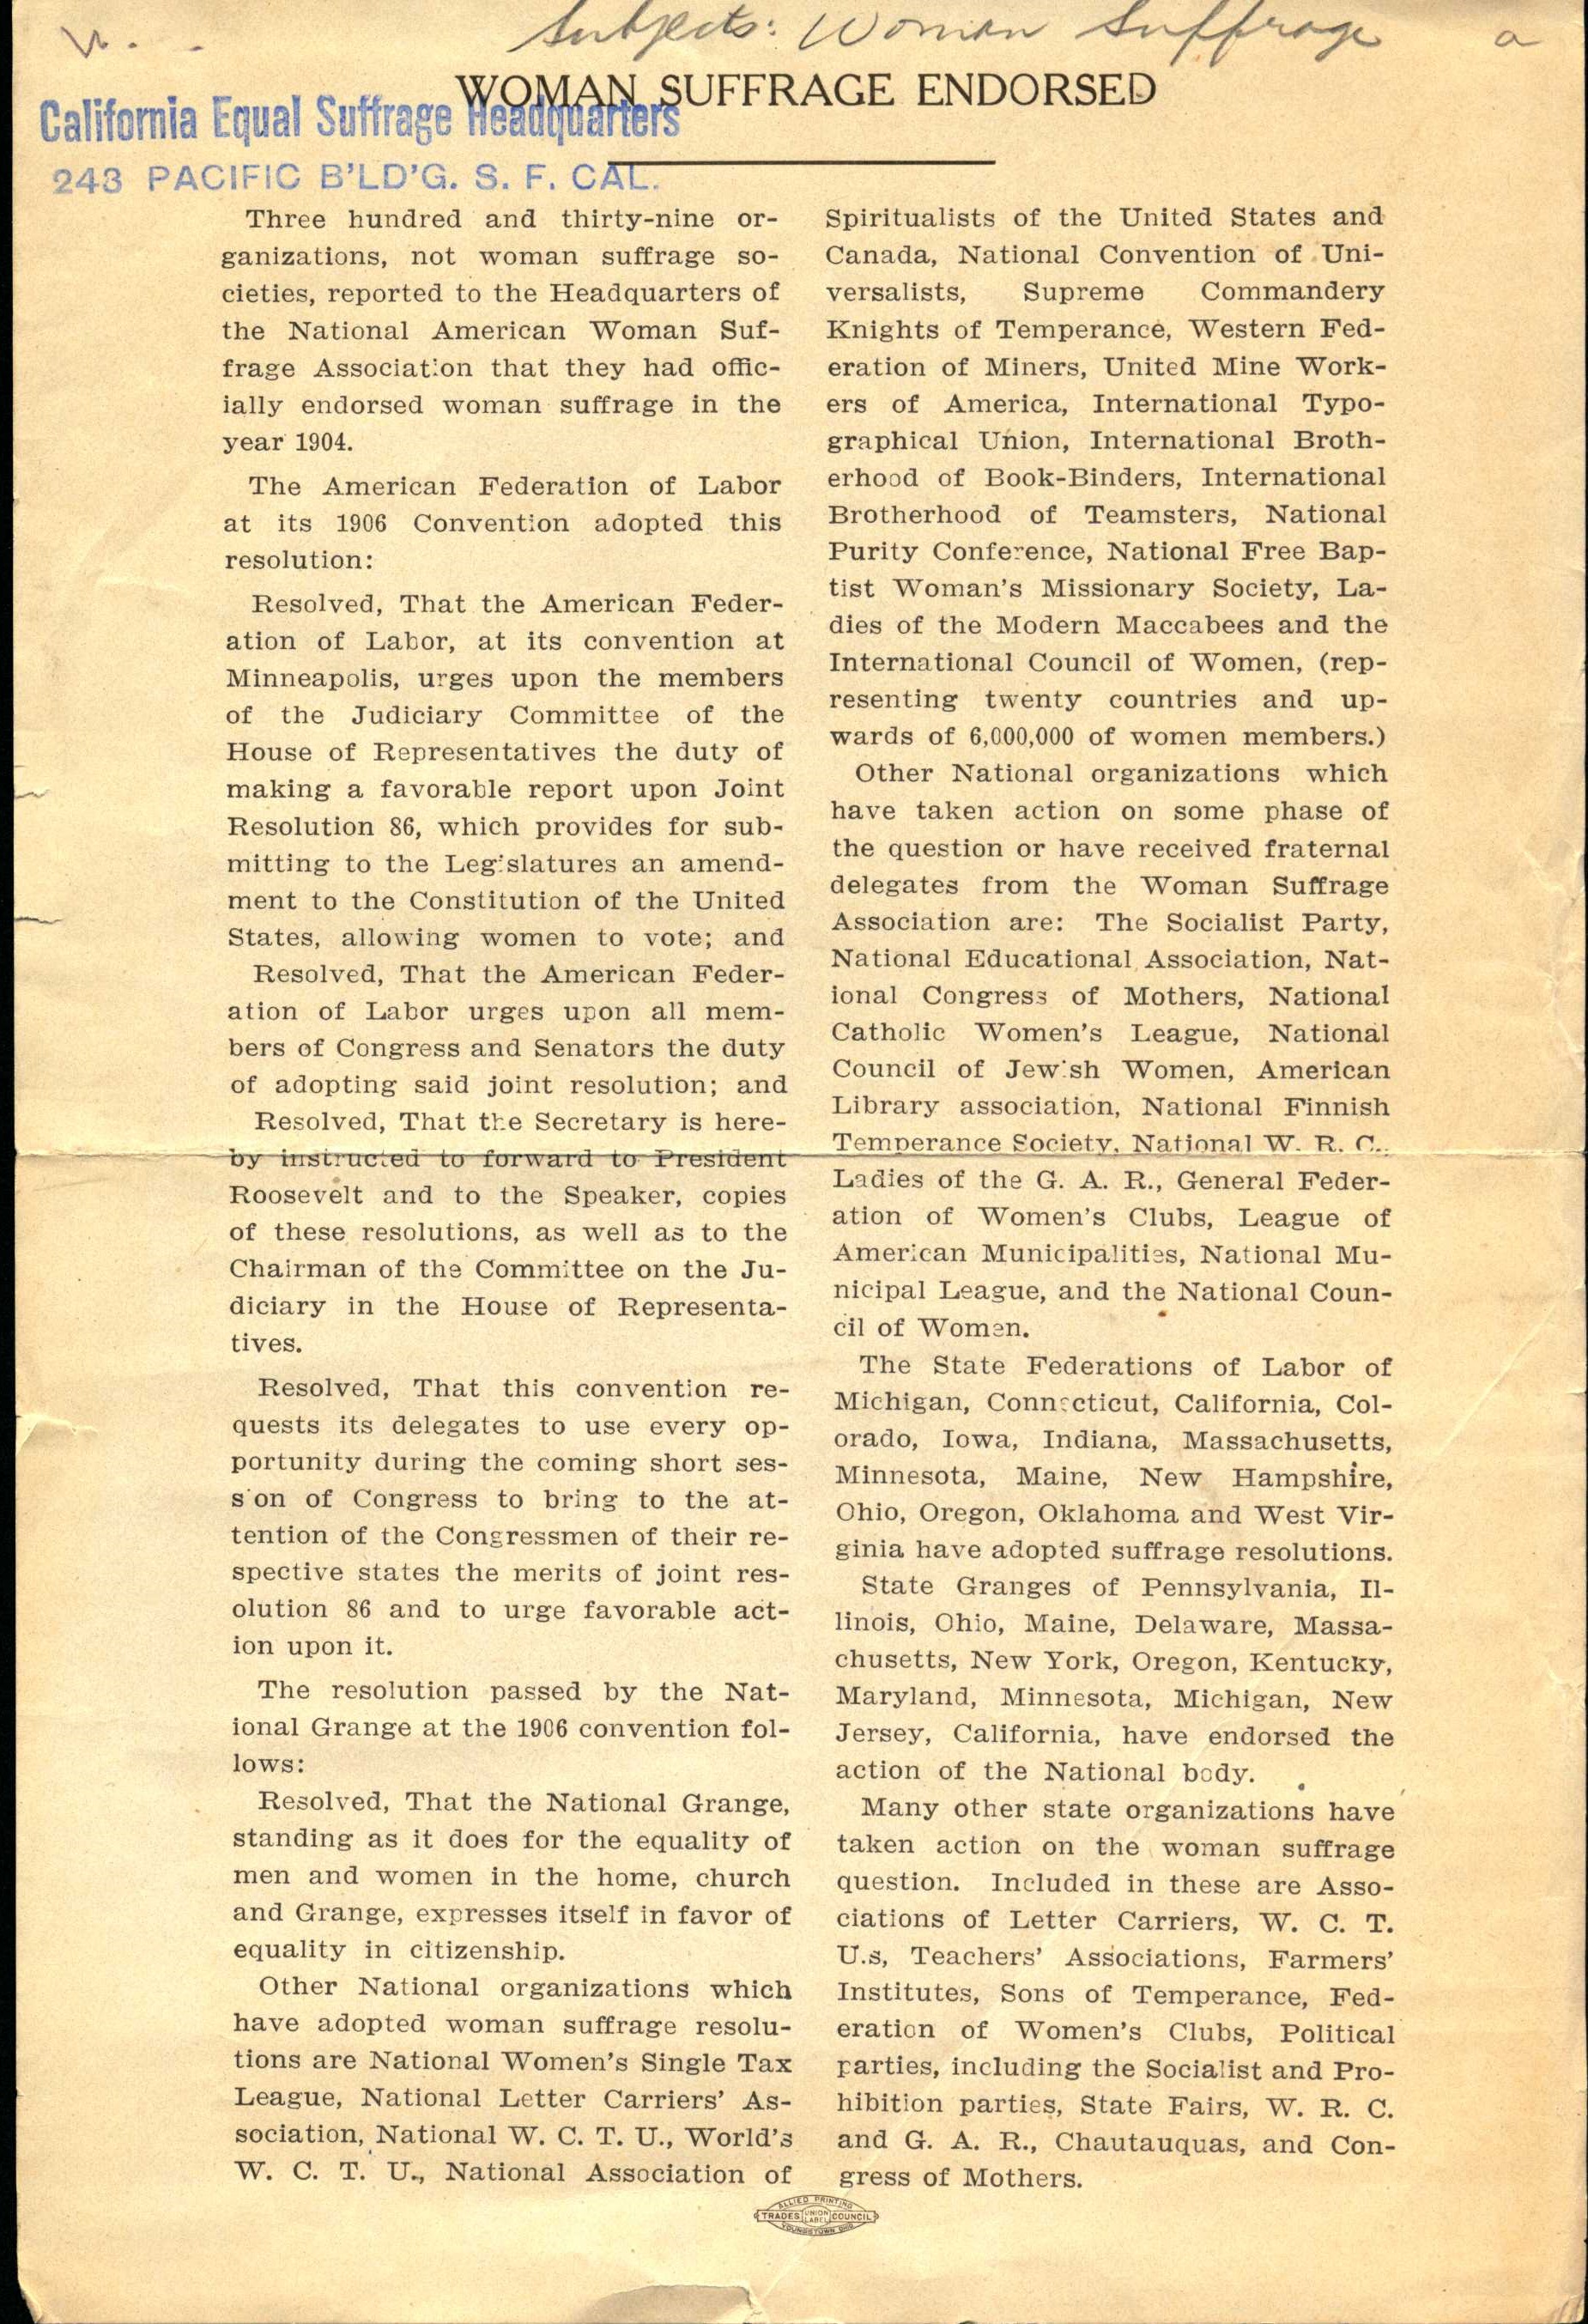 Shows title and the first page of the the article